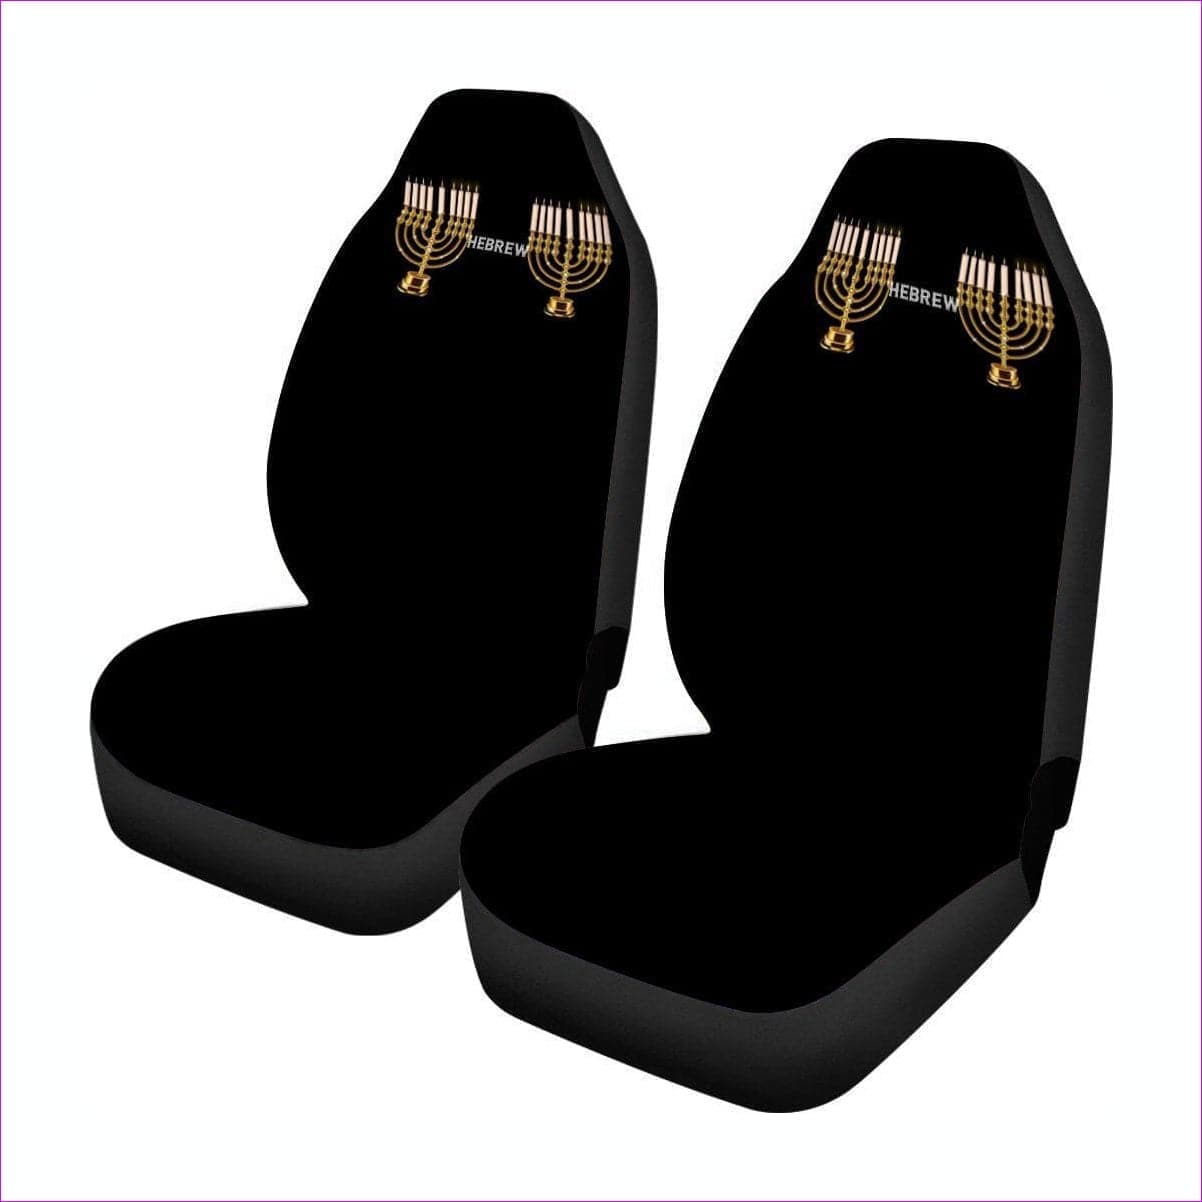 Universal Black - Hebrew Universal Car Seat Cover - car seat covers at TFC&H Co.